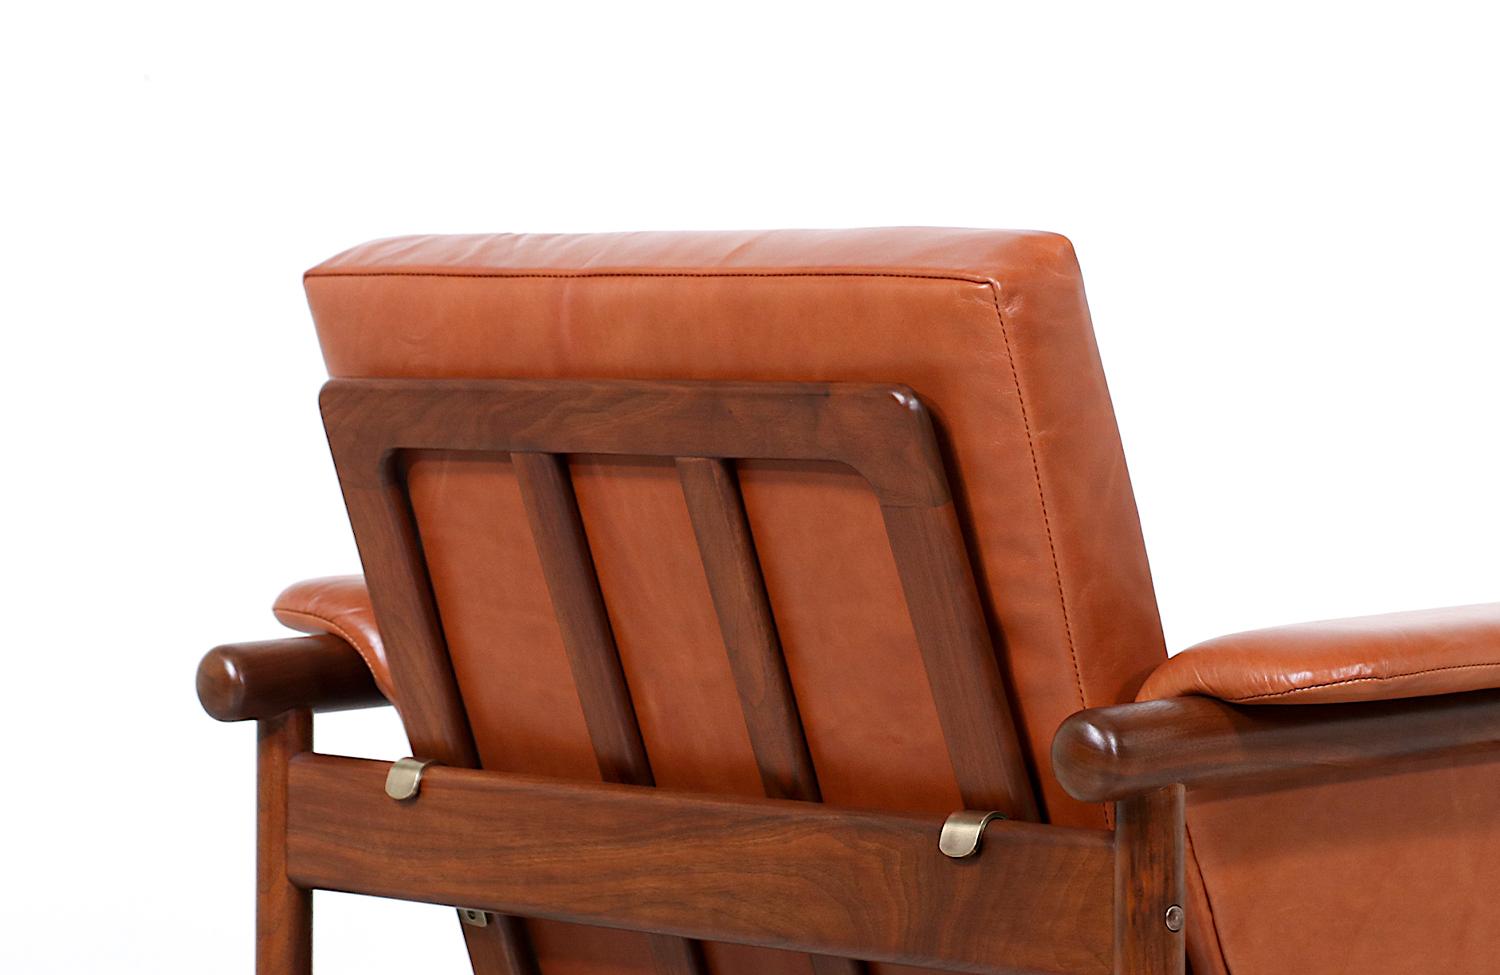 Illum Wikkelsø Cognac Leather Lounge Chair for Koefoed's Møbelfabrik In Excellent Condition For Sale In Los Angeles, CA